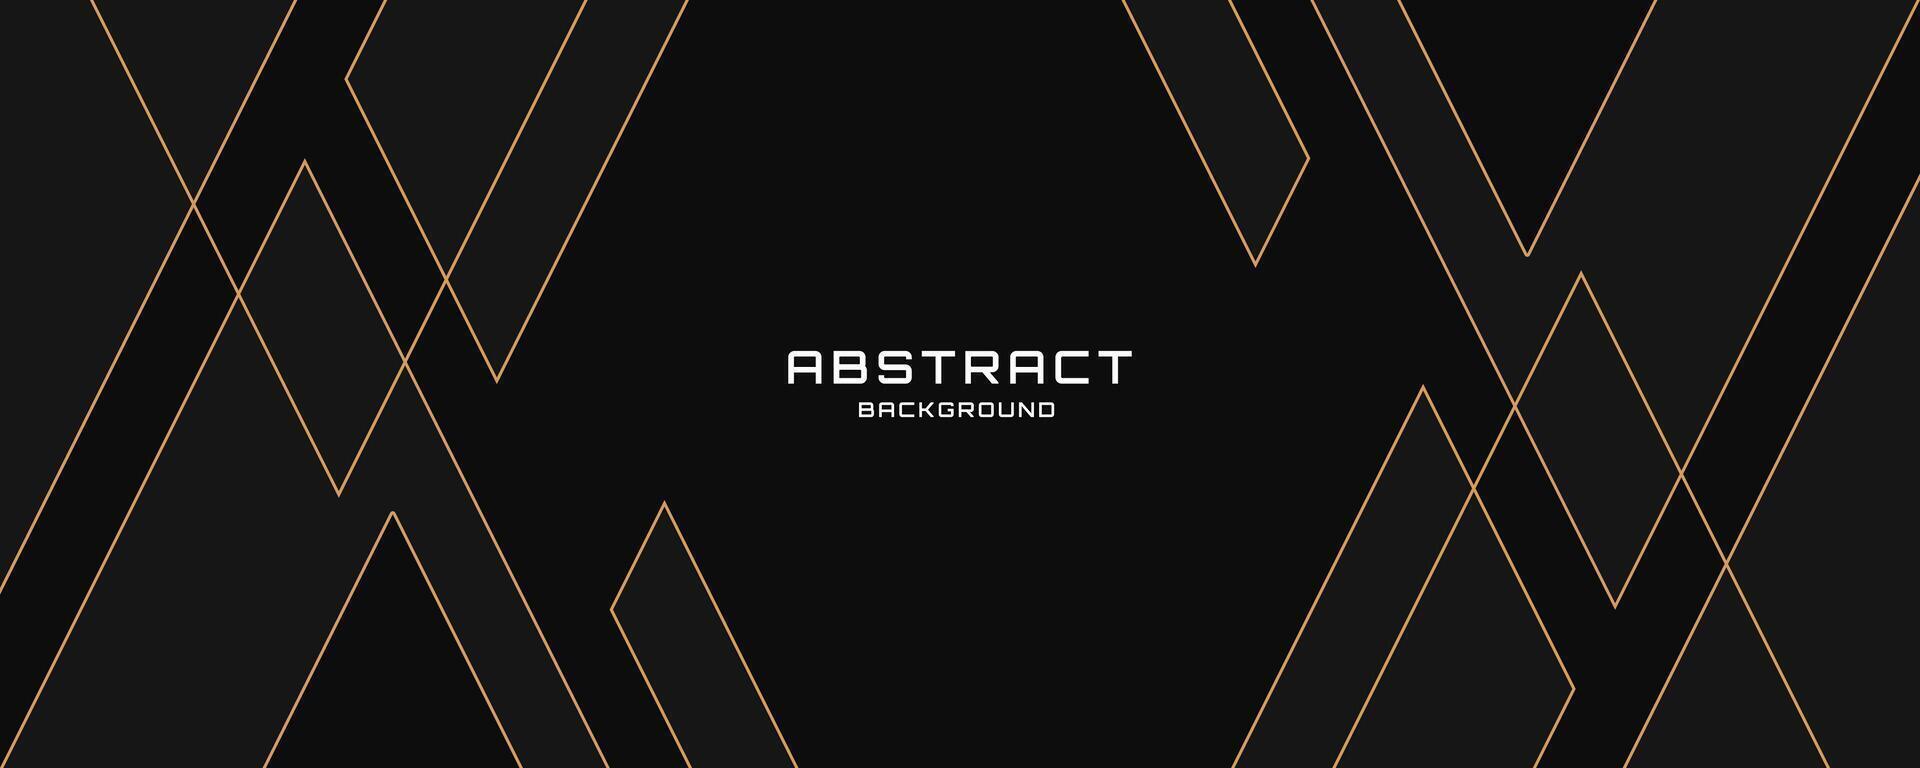 Abstract luxury background with geometric shapes. Trendy design template for banners, posters, covers, wallpapers, and others. vector